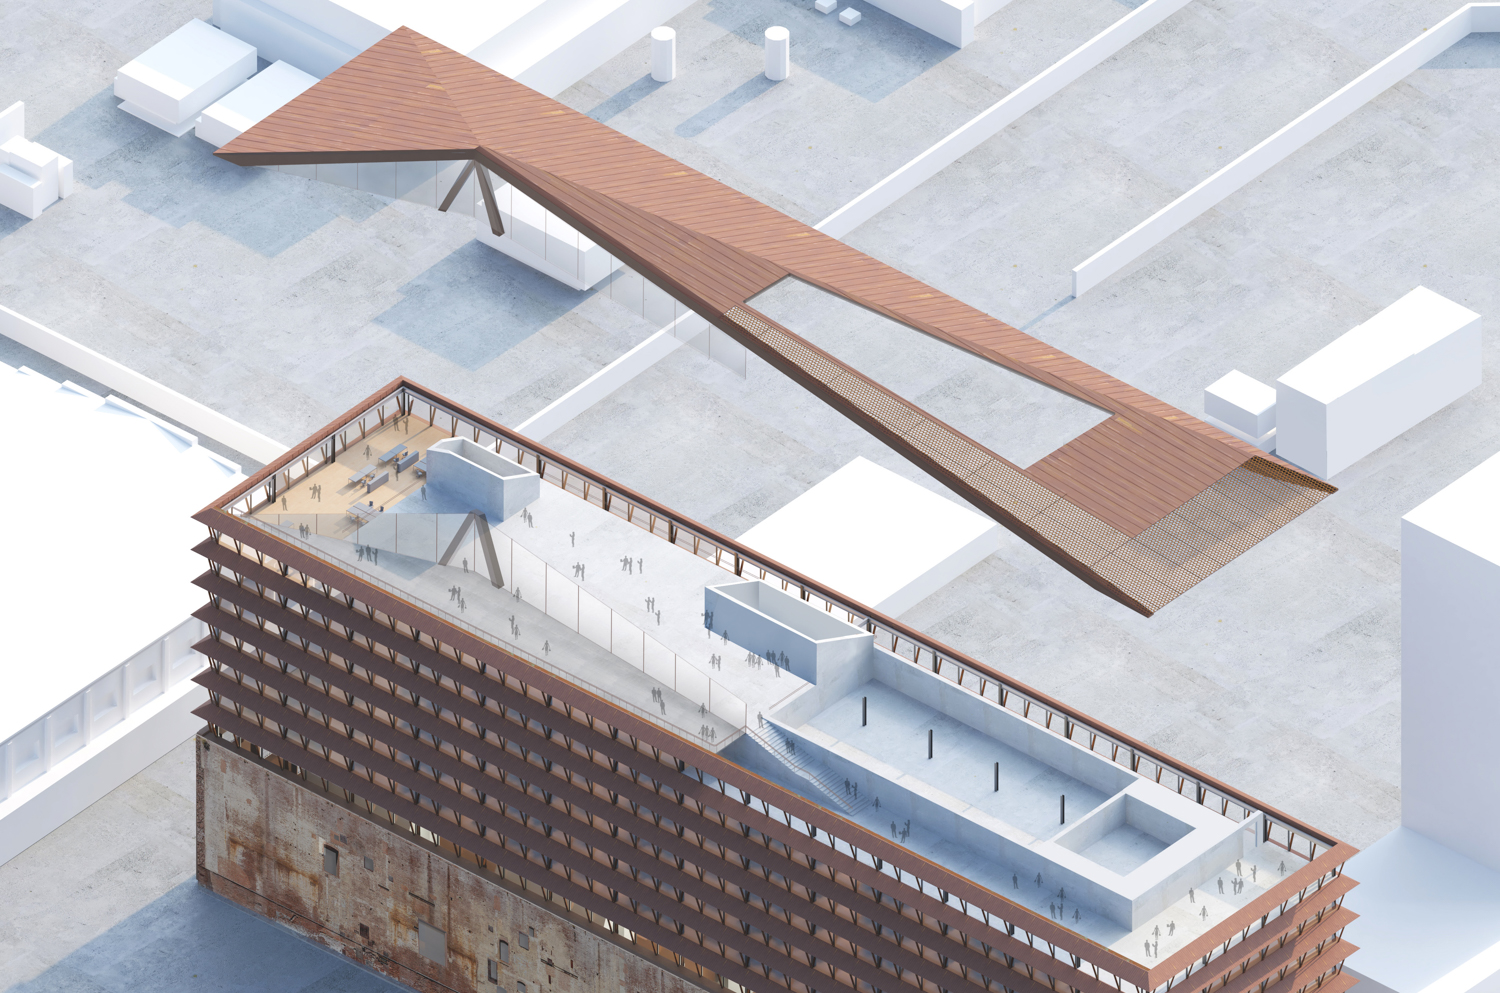 Station A rooftop terrace with shading, design by Adamson Associates and Herzog & de Meuron